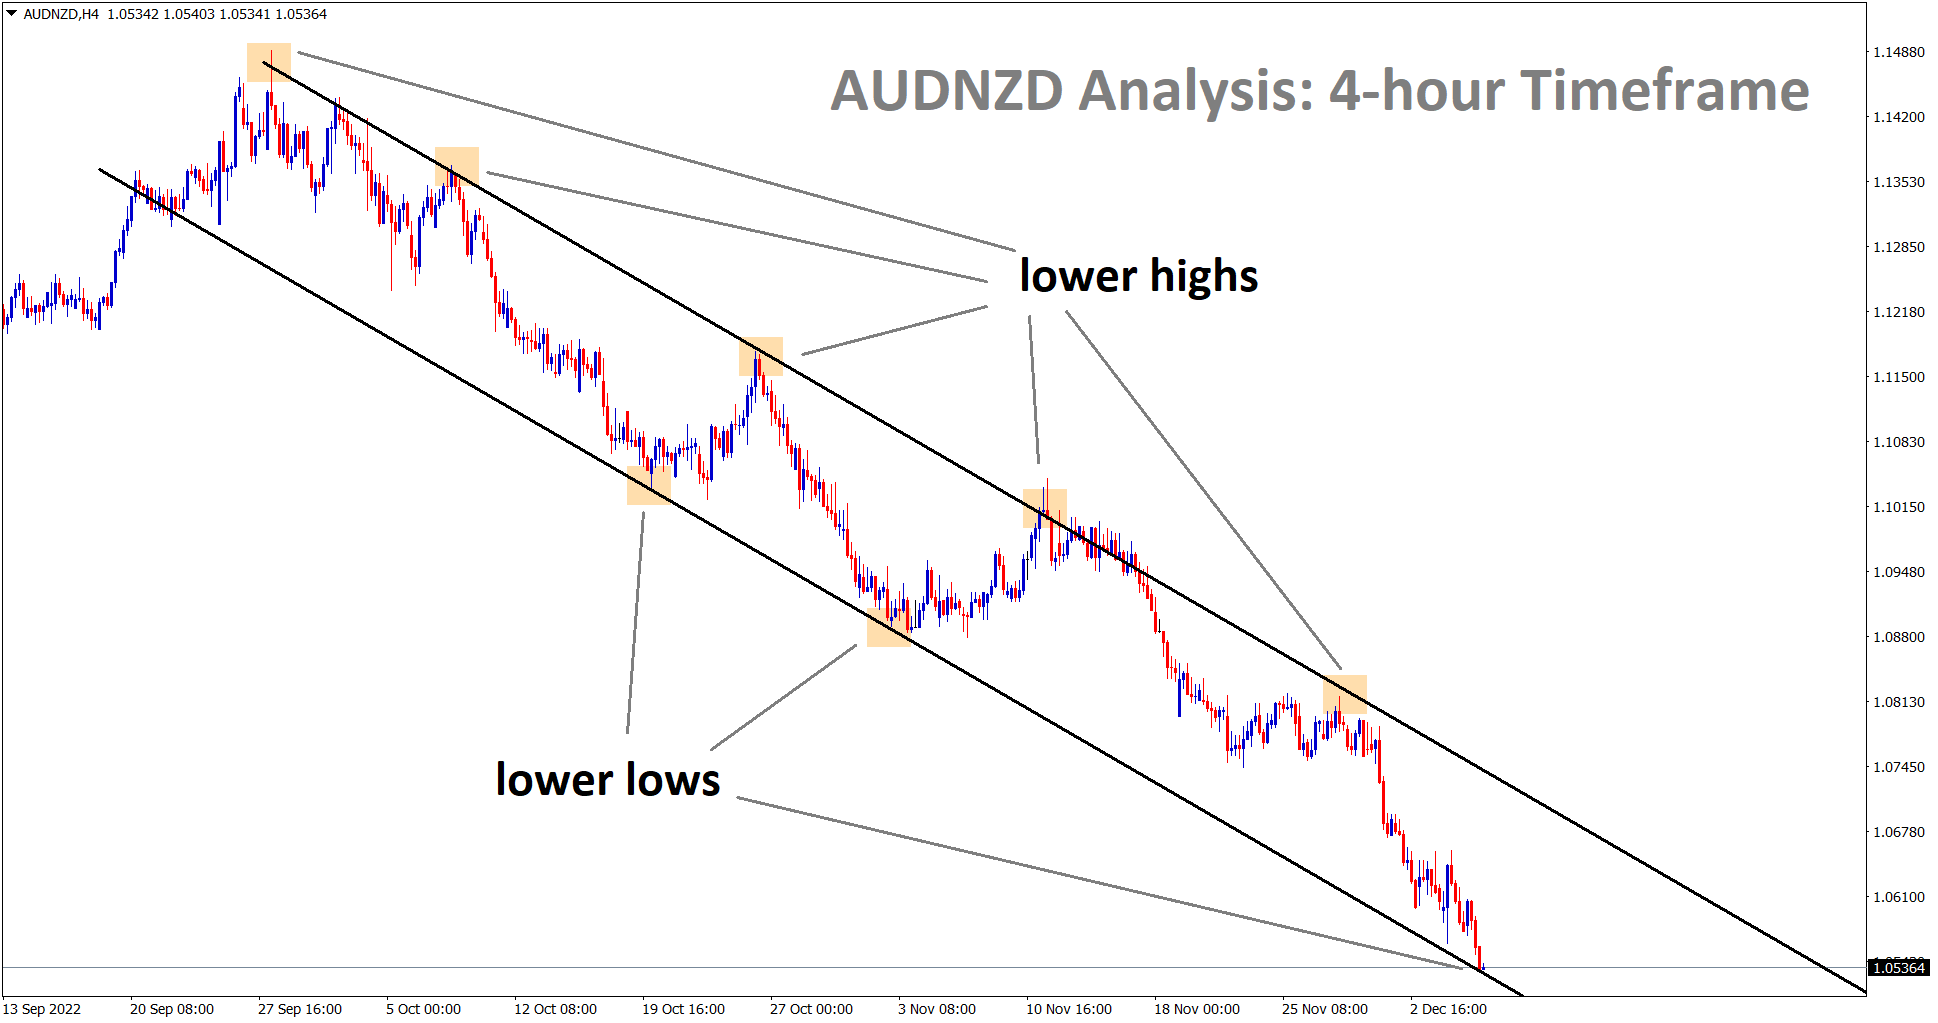 +550 Points Reached in AUDNZD Buy signal after reaching the lower areas of the channels in higher and lower timeframes